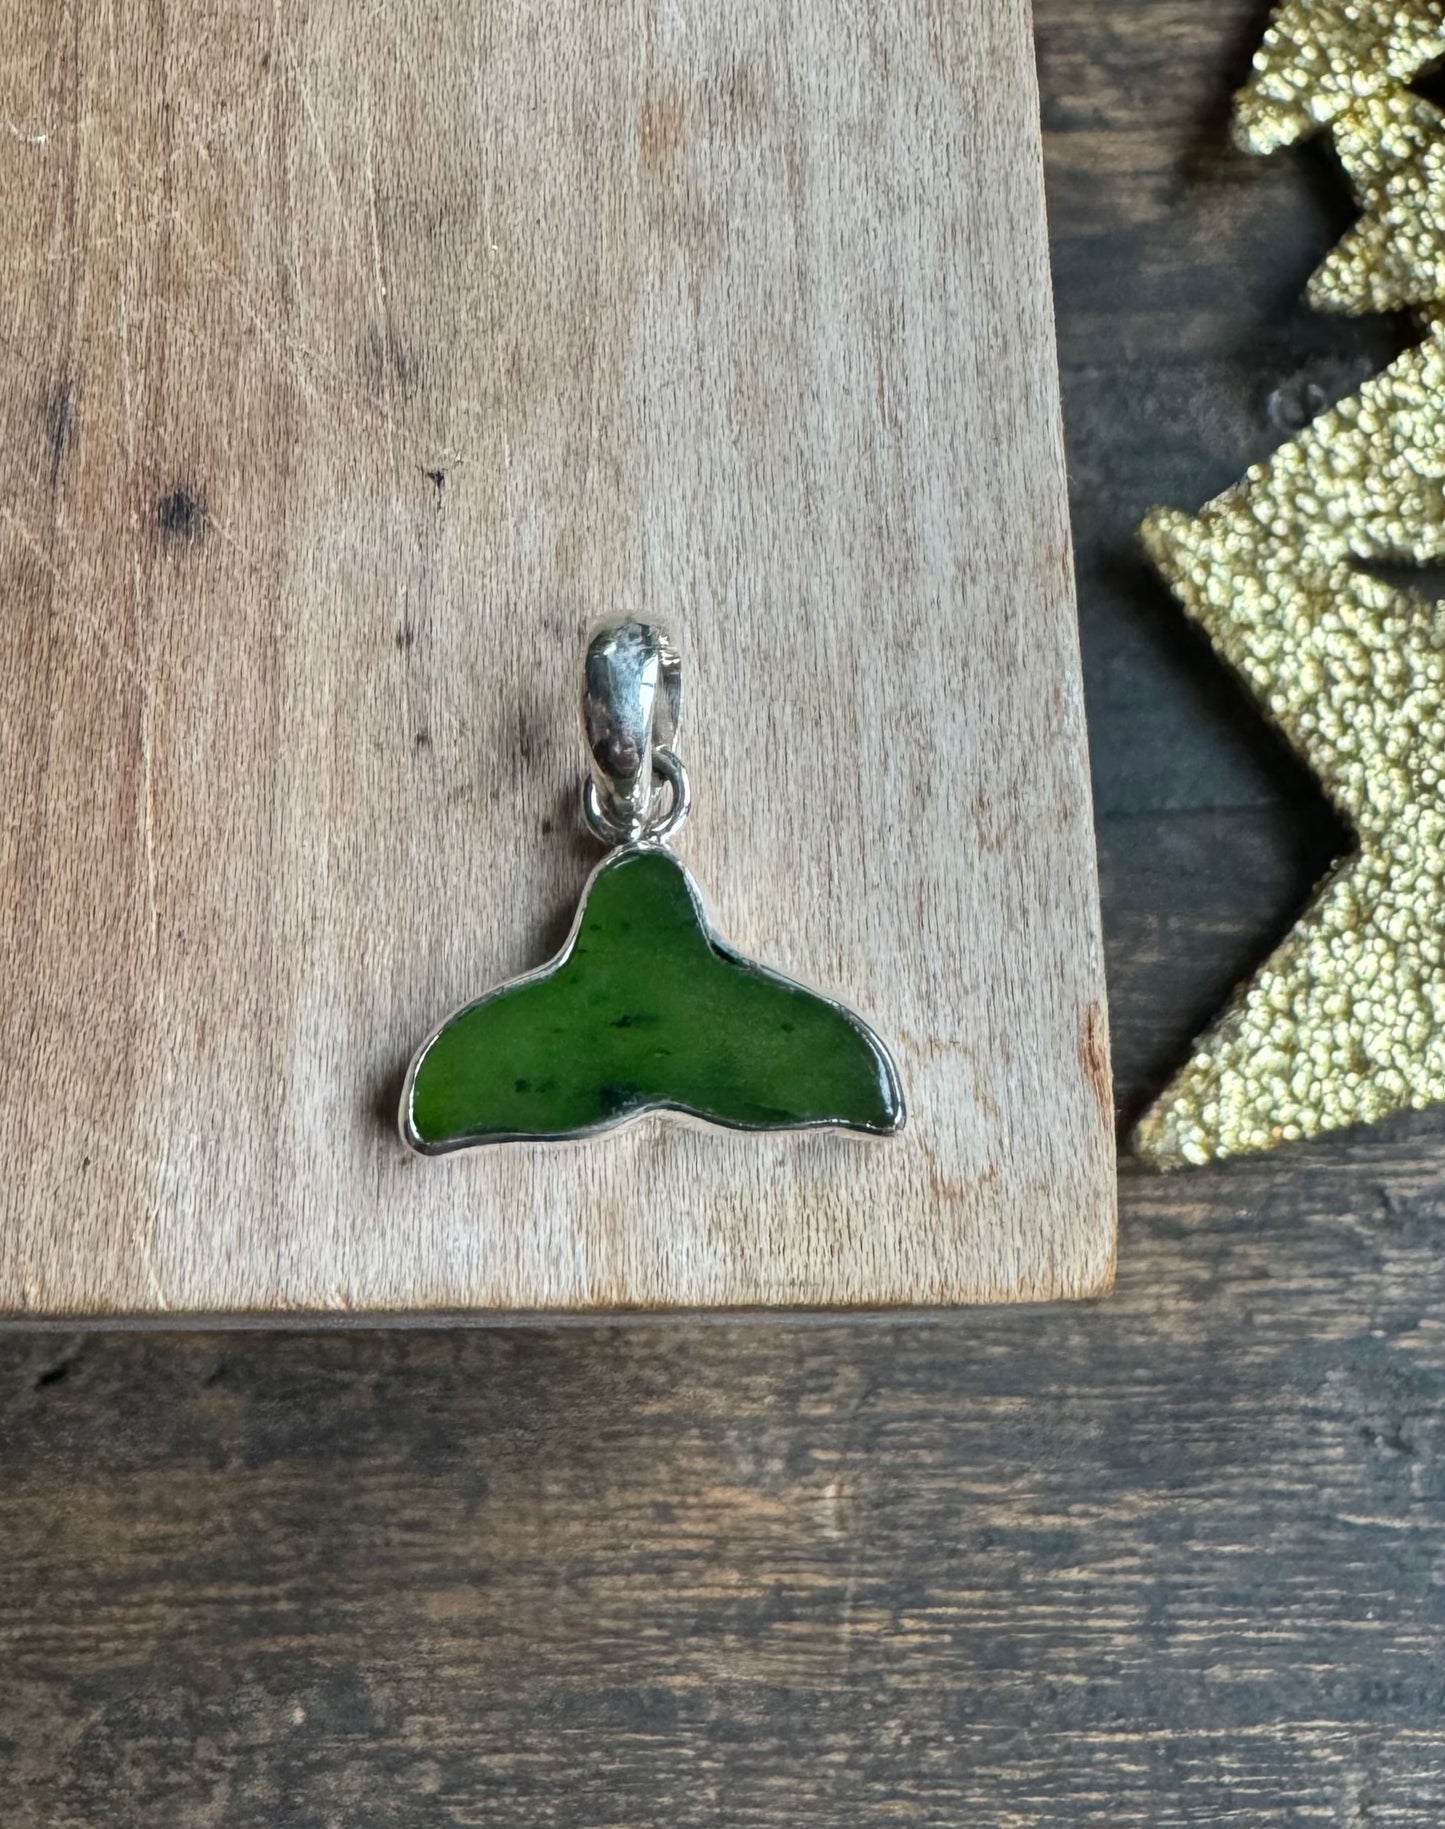 Jade Whale Tail Earrings and Pendant